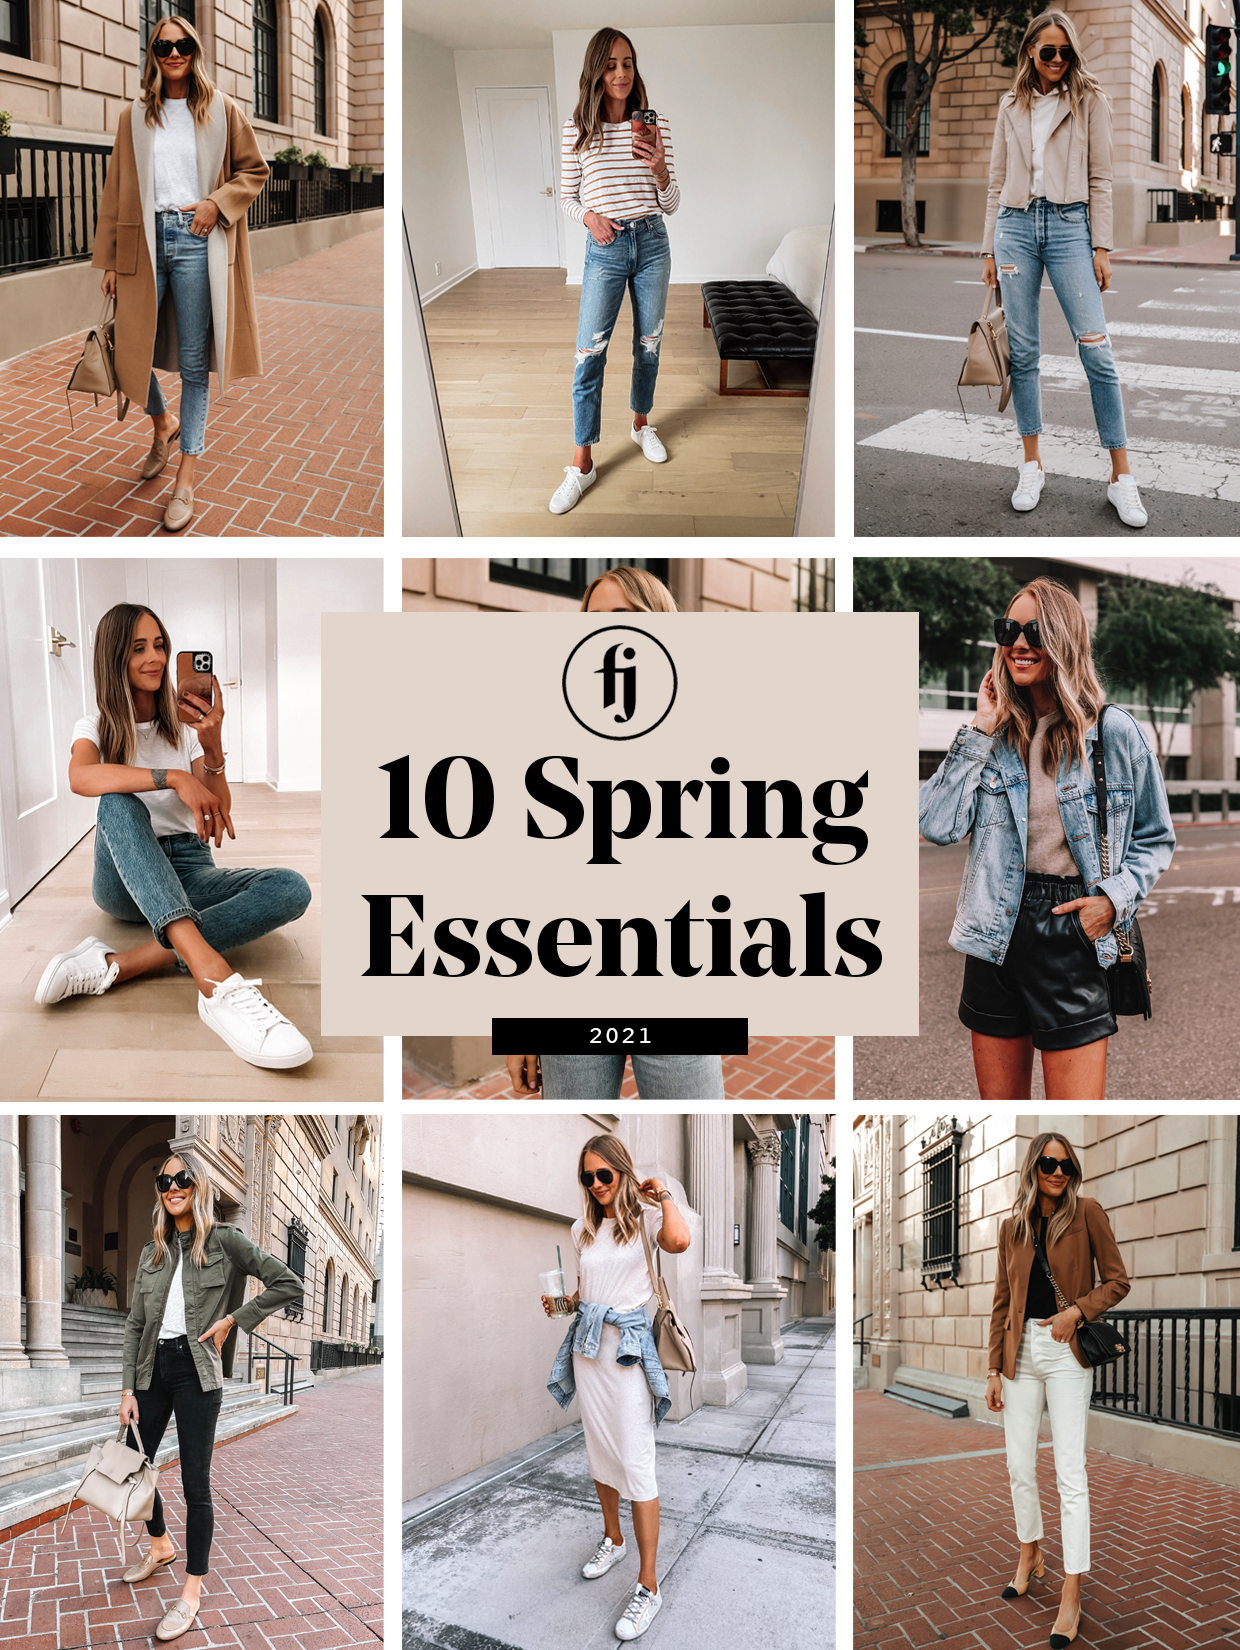 Prioritize These 5 Essentials for Elevated Spring Outfits